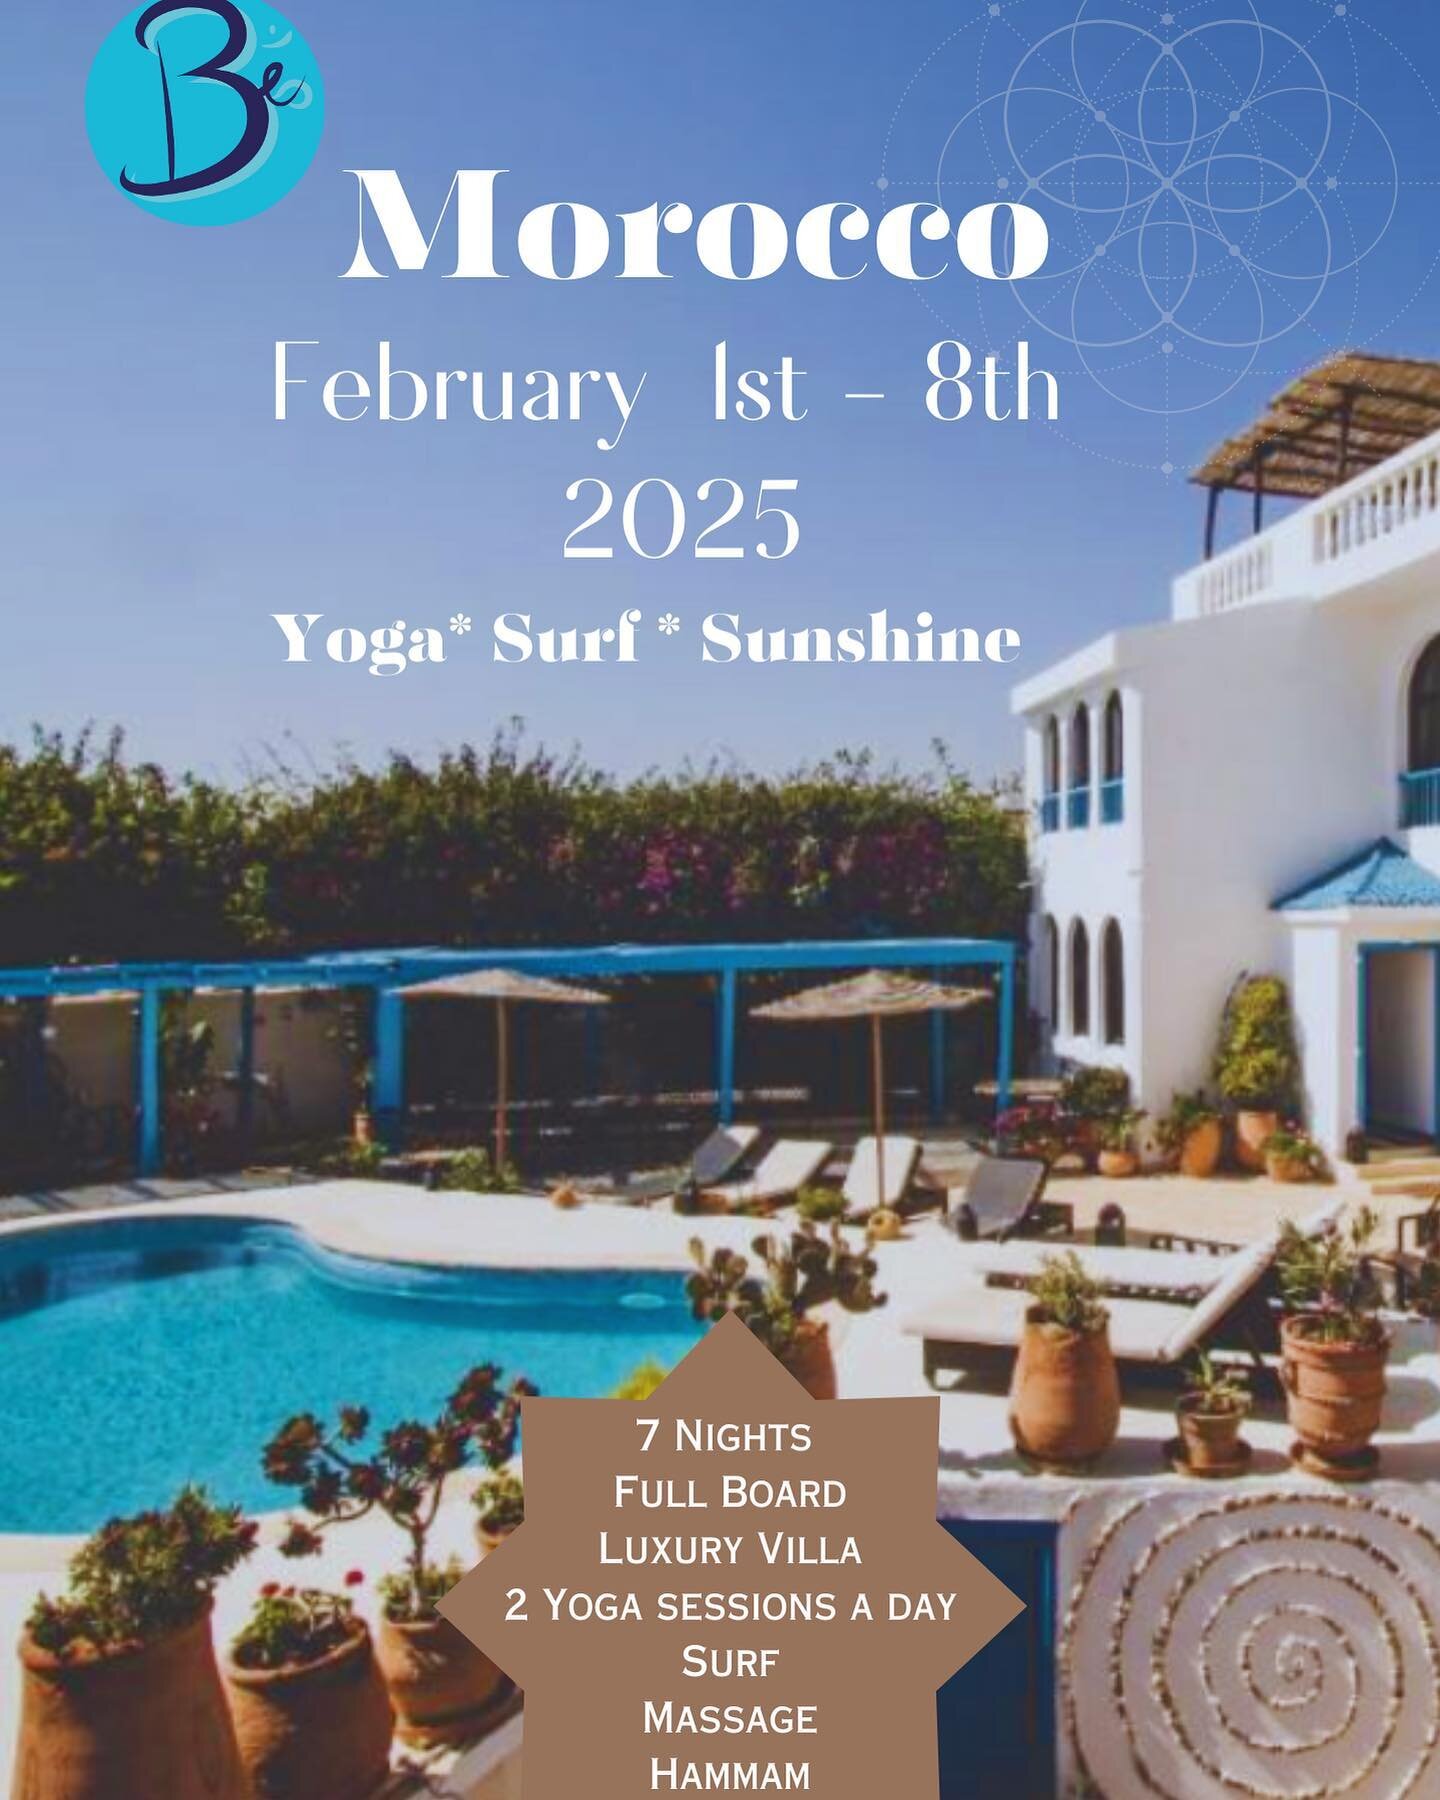 🇲🇦☀️🇲🇦 Join us in winter 2025 for some sunshine in Morocco 🇲🇦.
.
We&rsquo;re taking bookings now with 6 month payment plans available ( no interest ) 😊 .
.
Prices based on 2/3 sharing a double/twin or triple room and includes;

☀️3 Yoga &amp; 